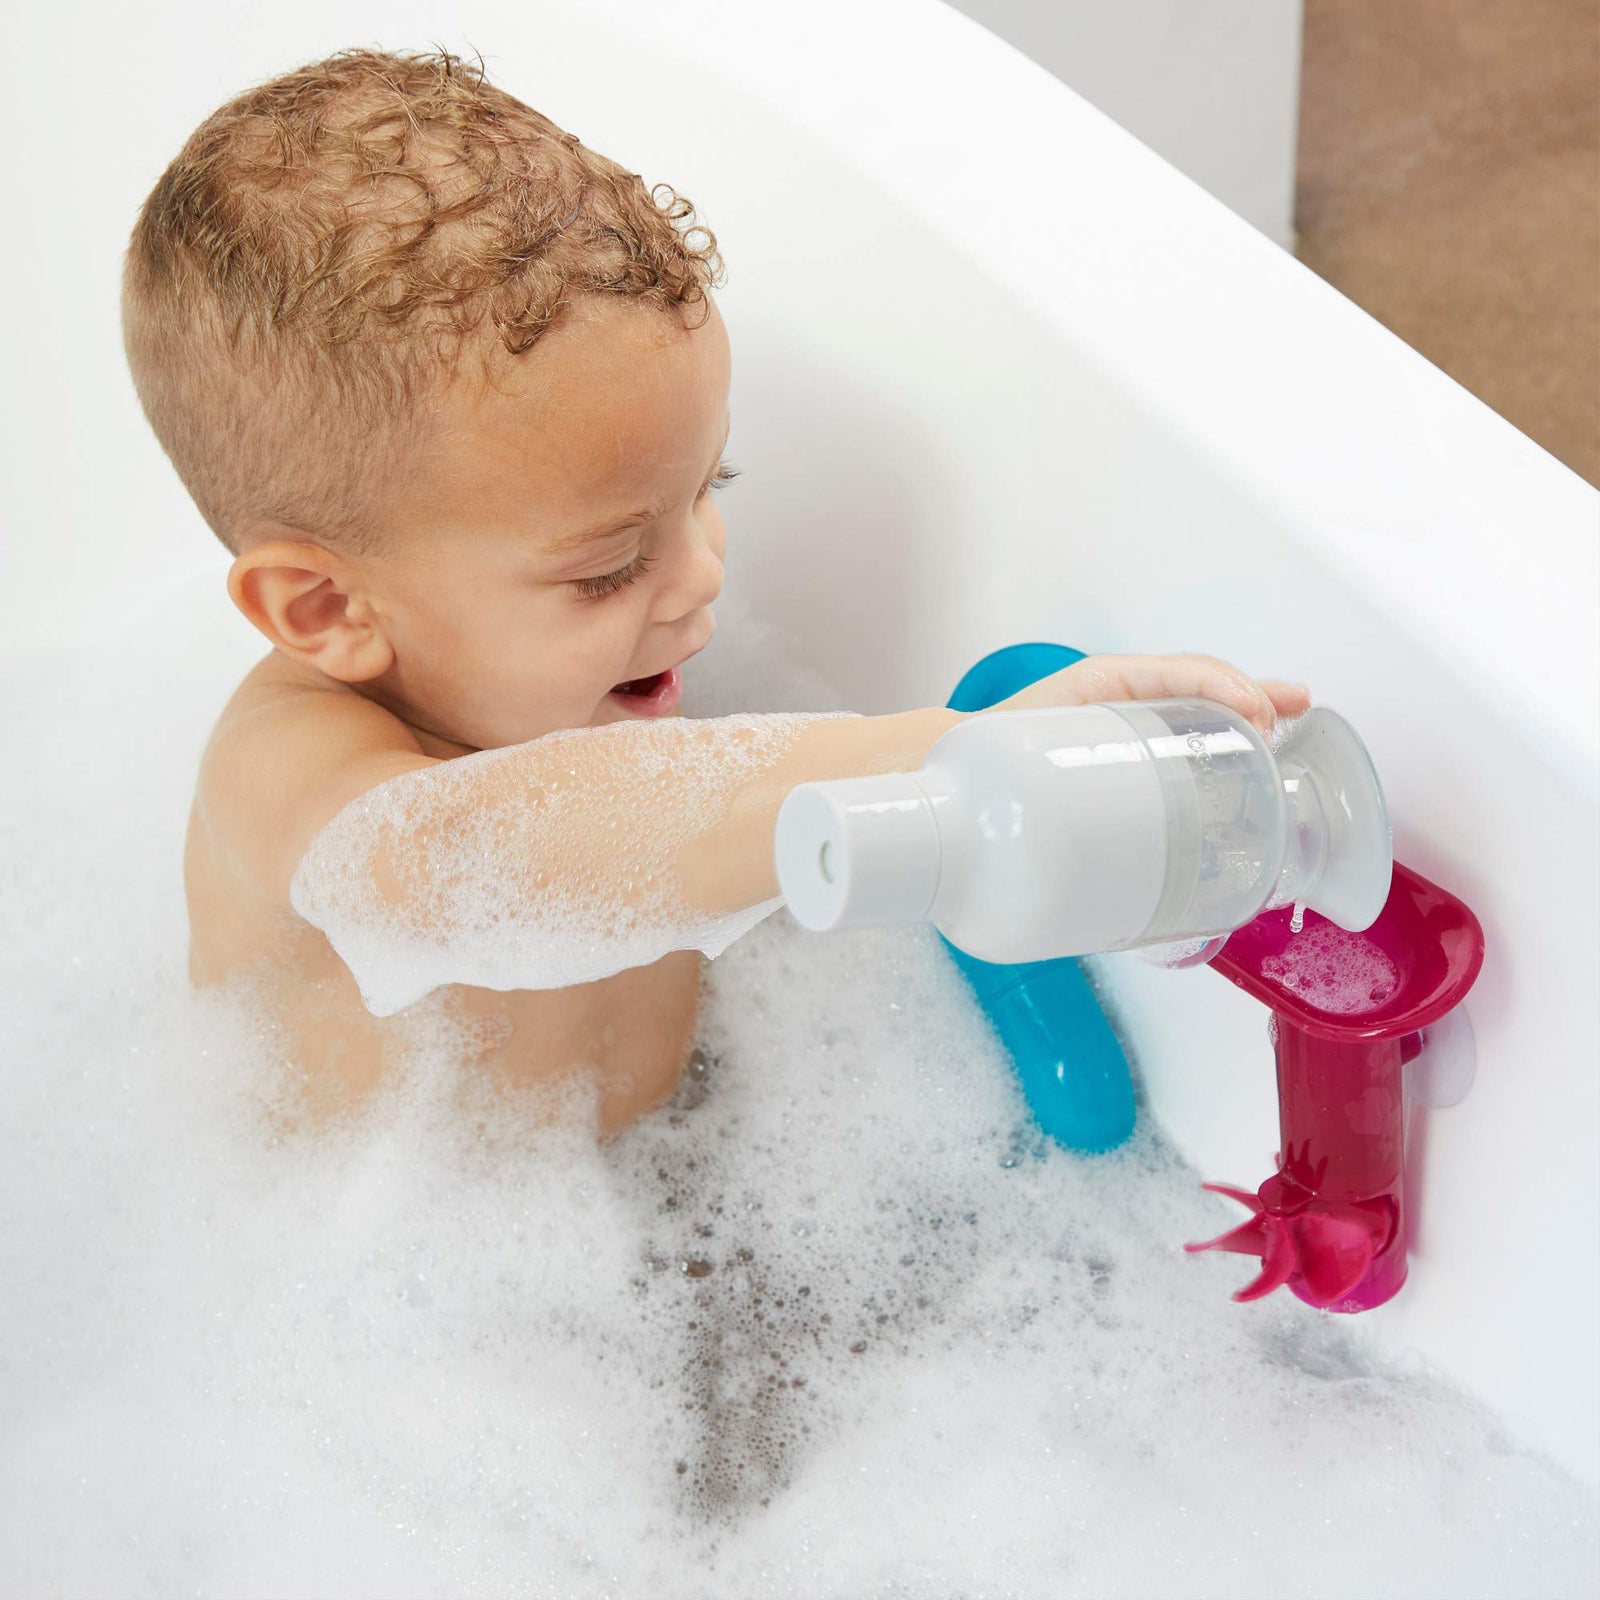 Boon BUNDLE Building Toddler Bath Tub Toy with Pipes, Cogs and Tubes for Kids Aged 12 Months and Up, Multicolor (Pack of 13)